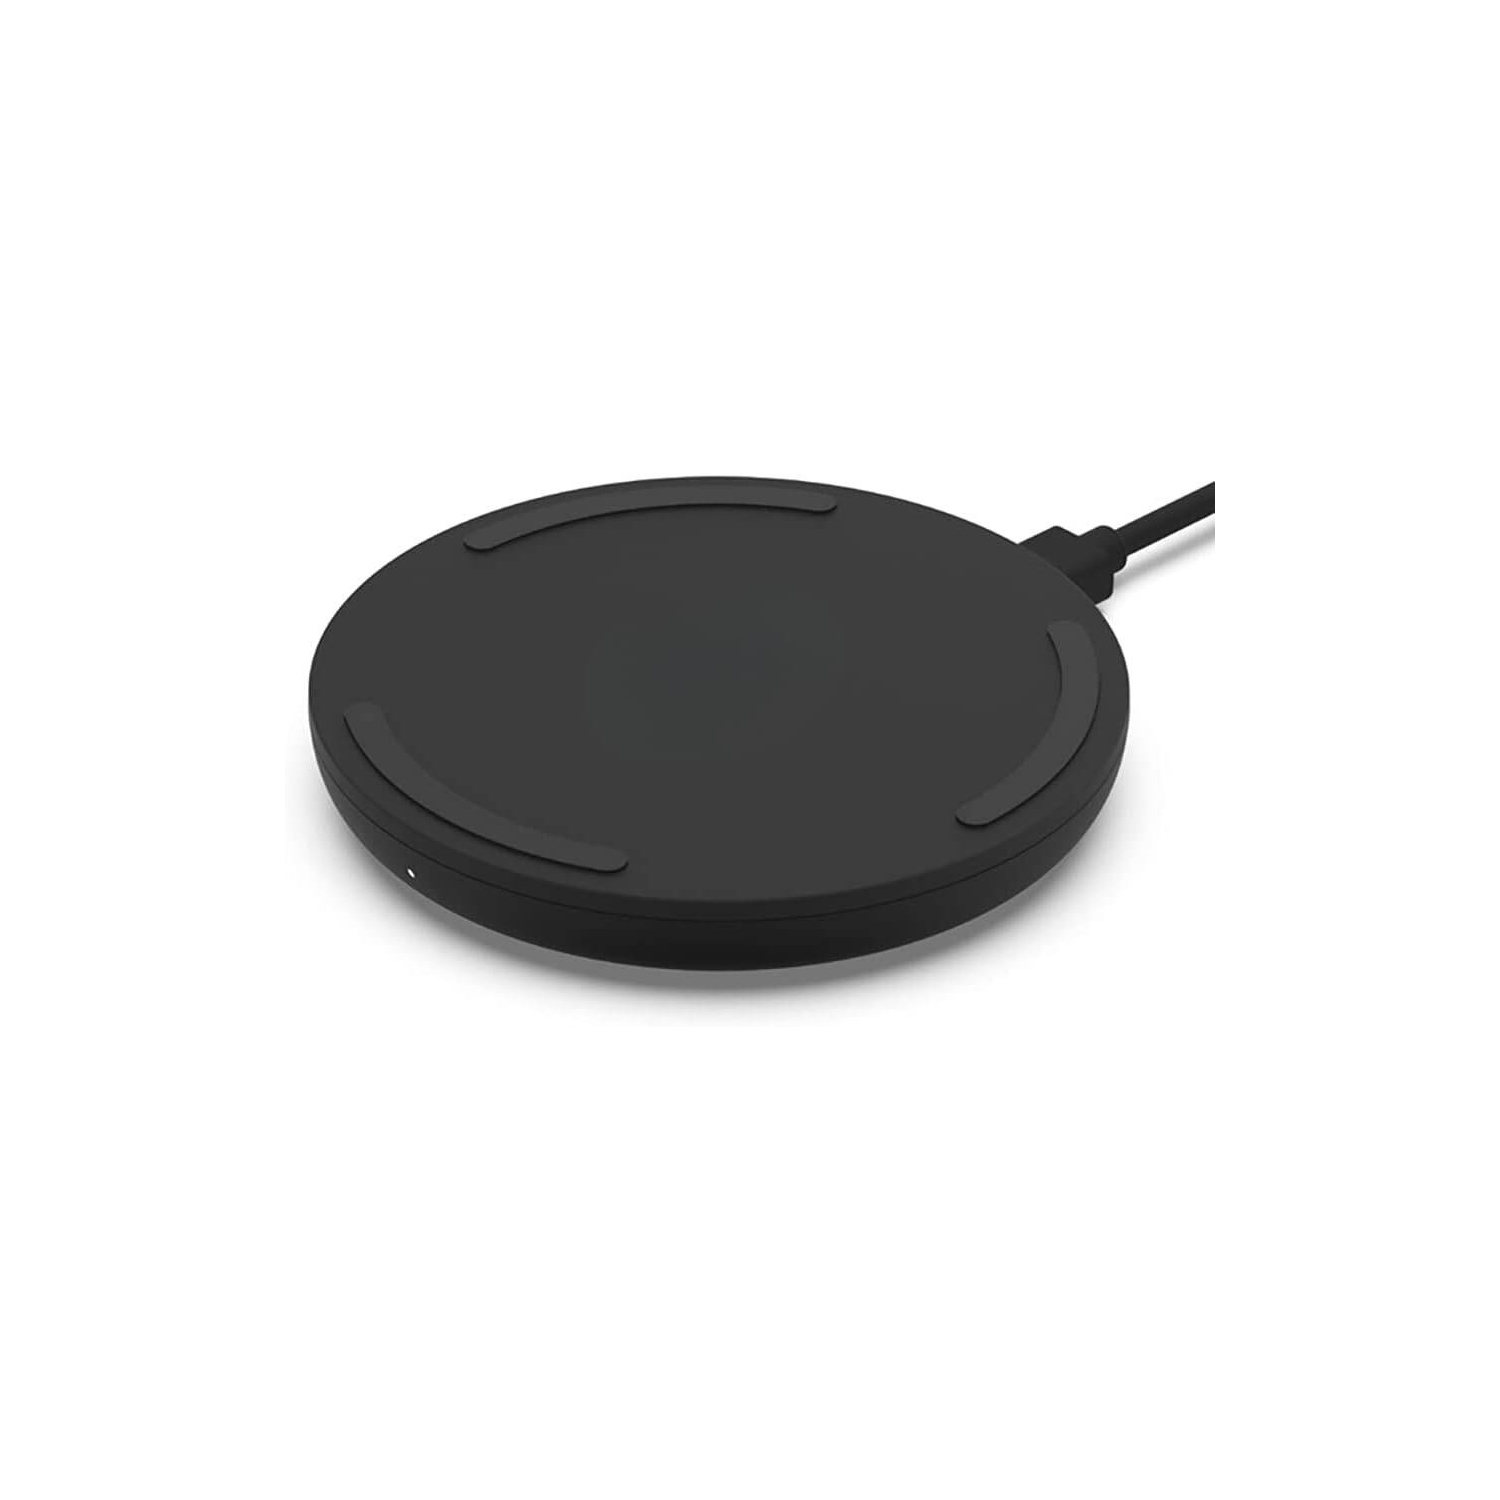 Wireless Charger, 10W Max Qi Fast Charging Pad, Quick Charge Cordless Flat Charger for Samsung Galaxy, AirPods, iPhone,Google Pixel and More